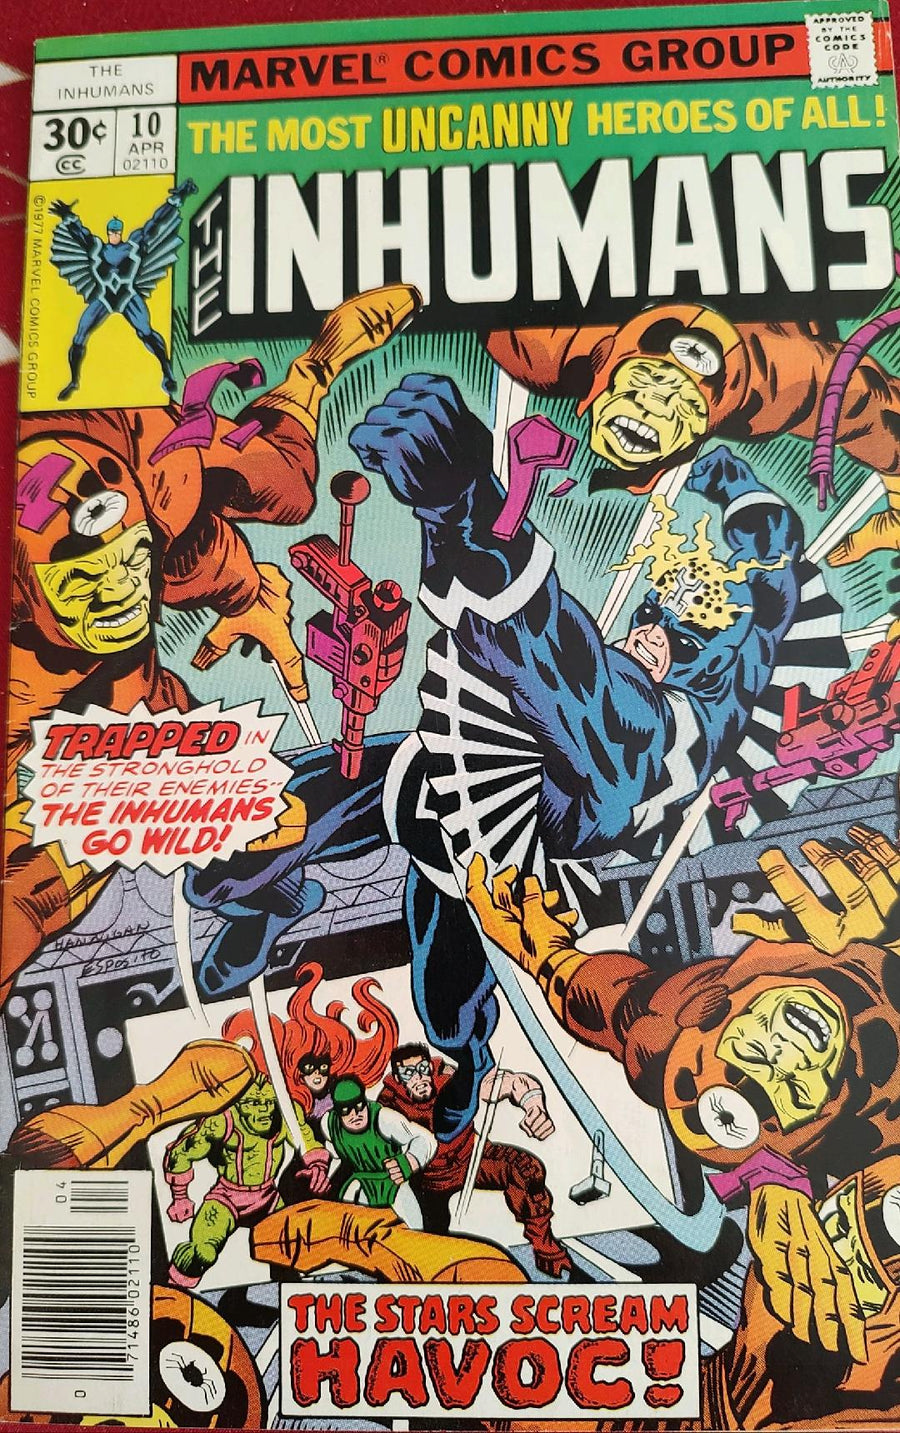 The Inhumans #10 Comic Book Cover